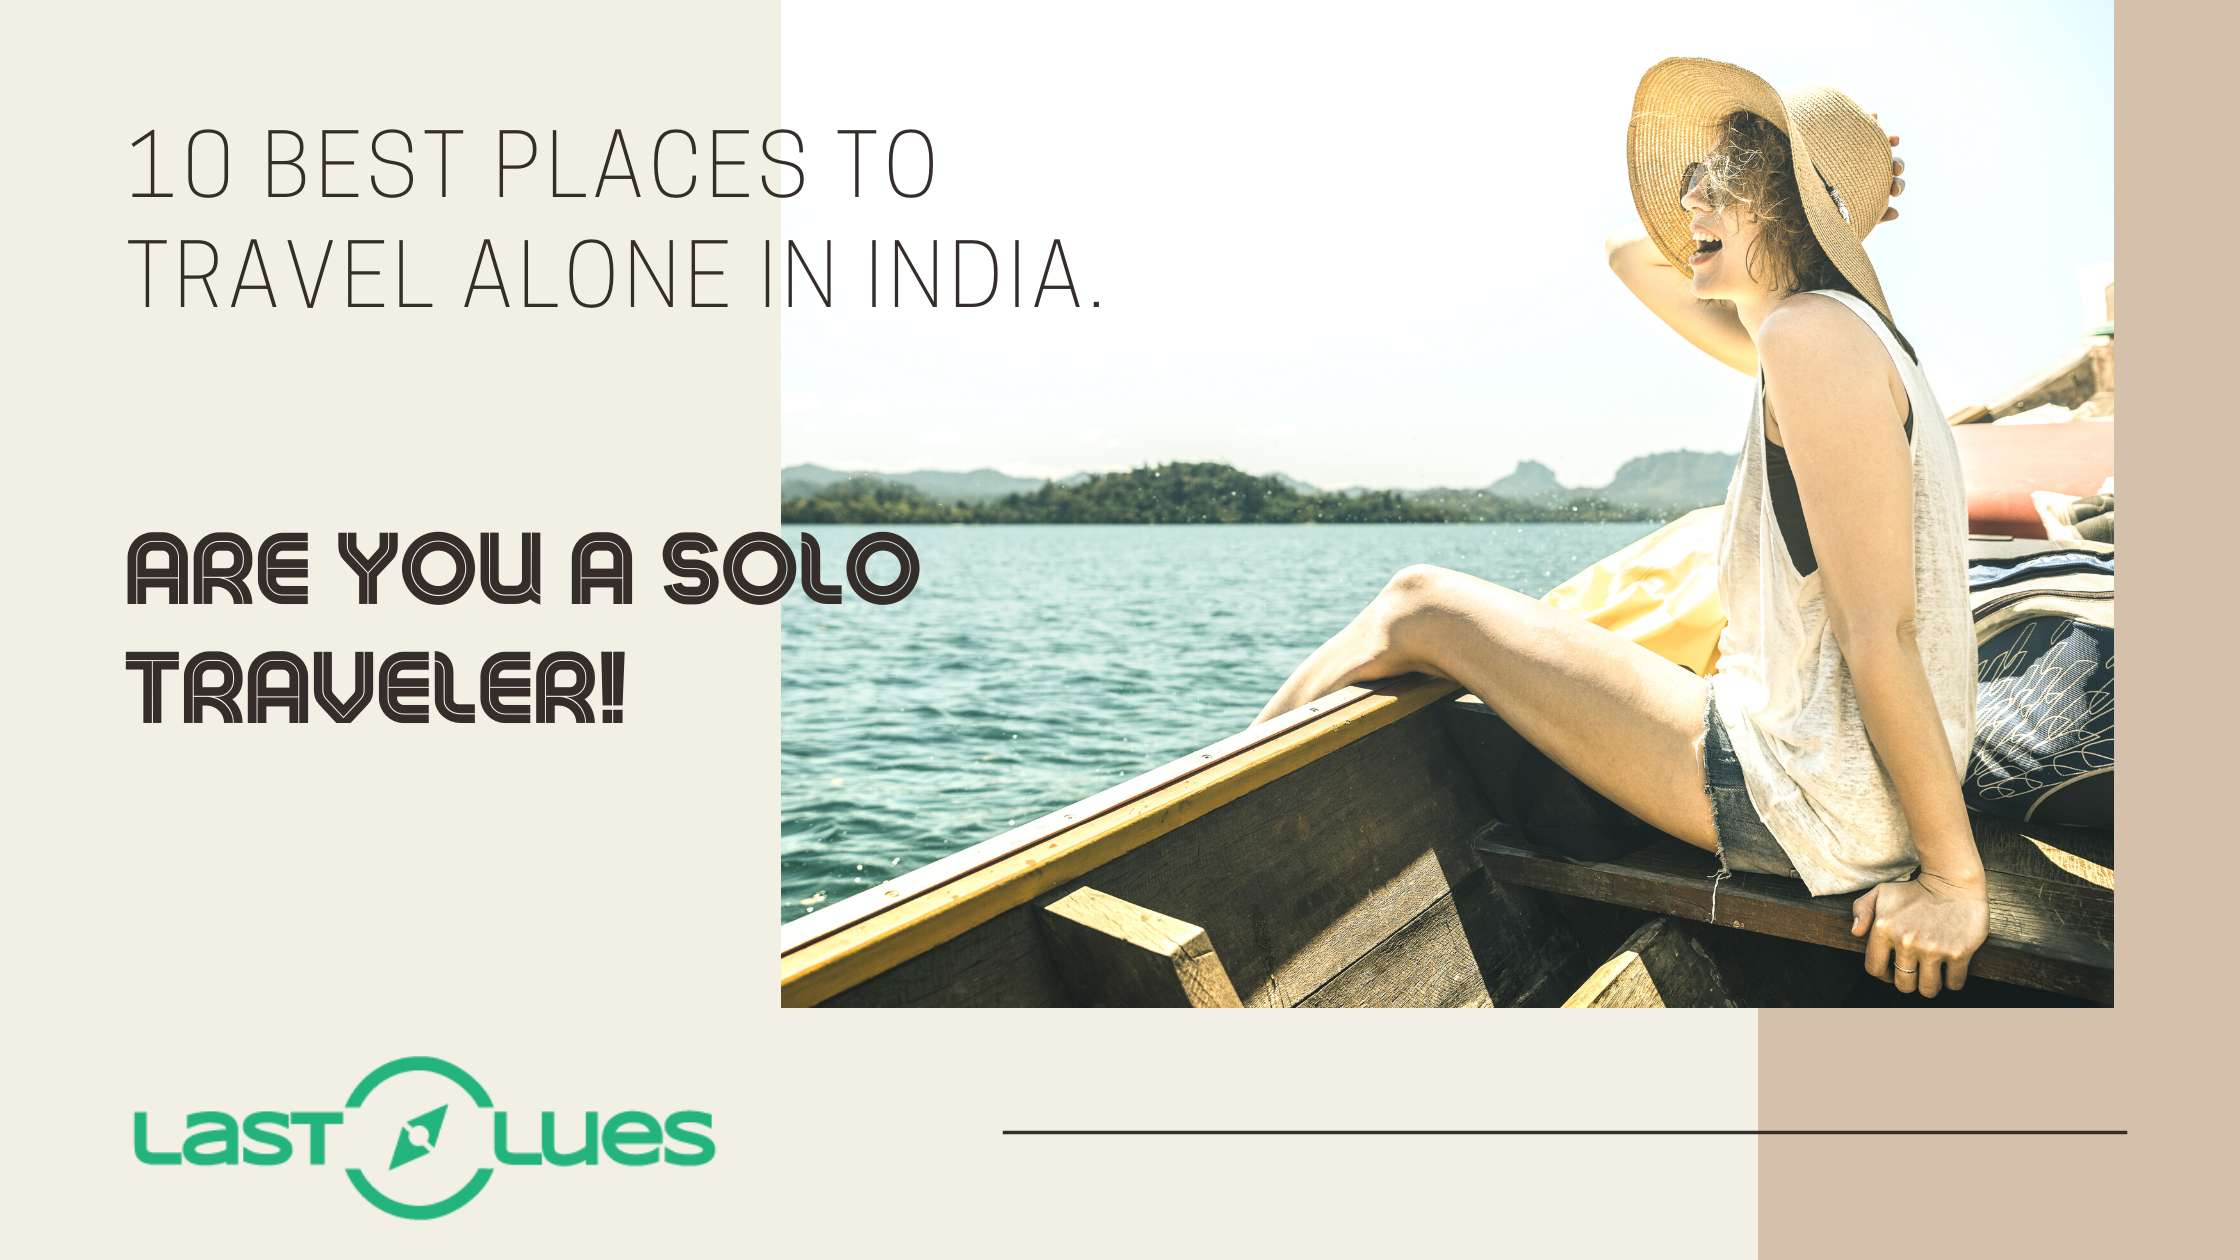 Are You a Solo Traveler! Check Out 10 Best Places To Travel Alone In India